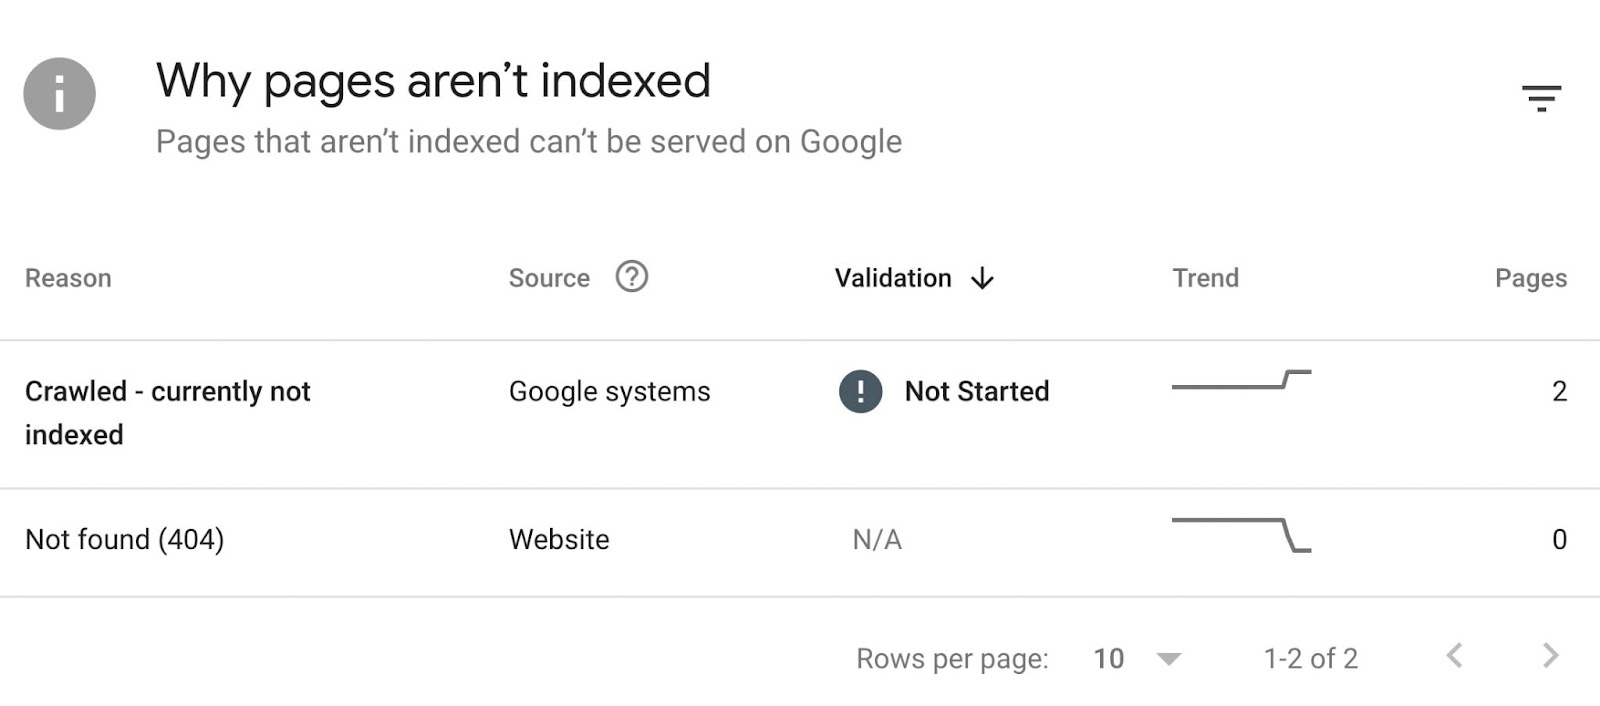 "Why pages aren't indexed" page in Google Search Console